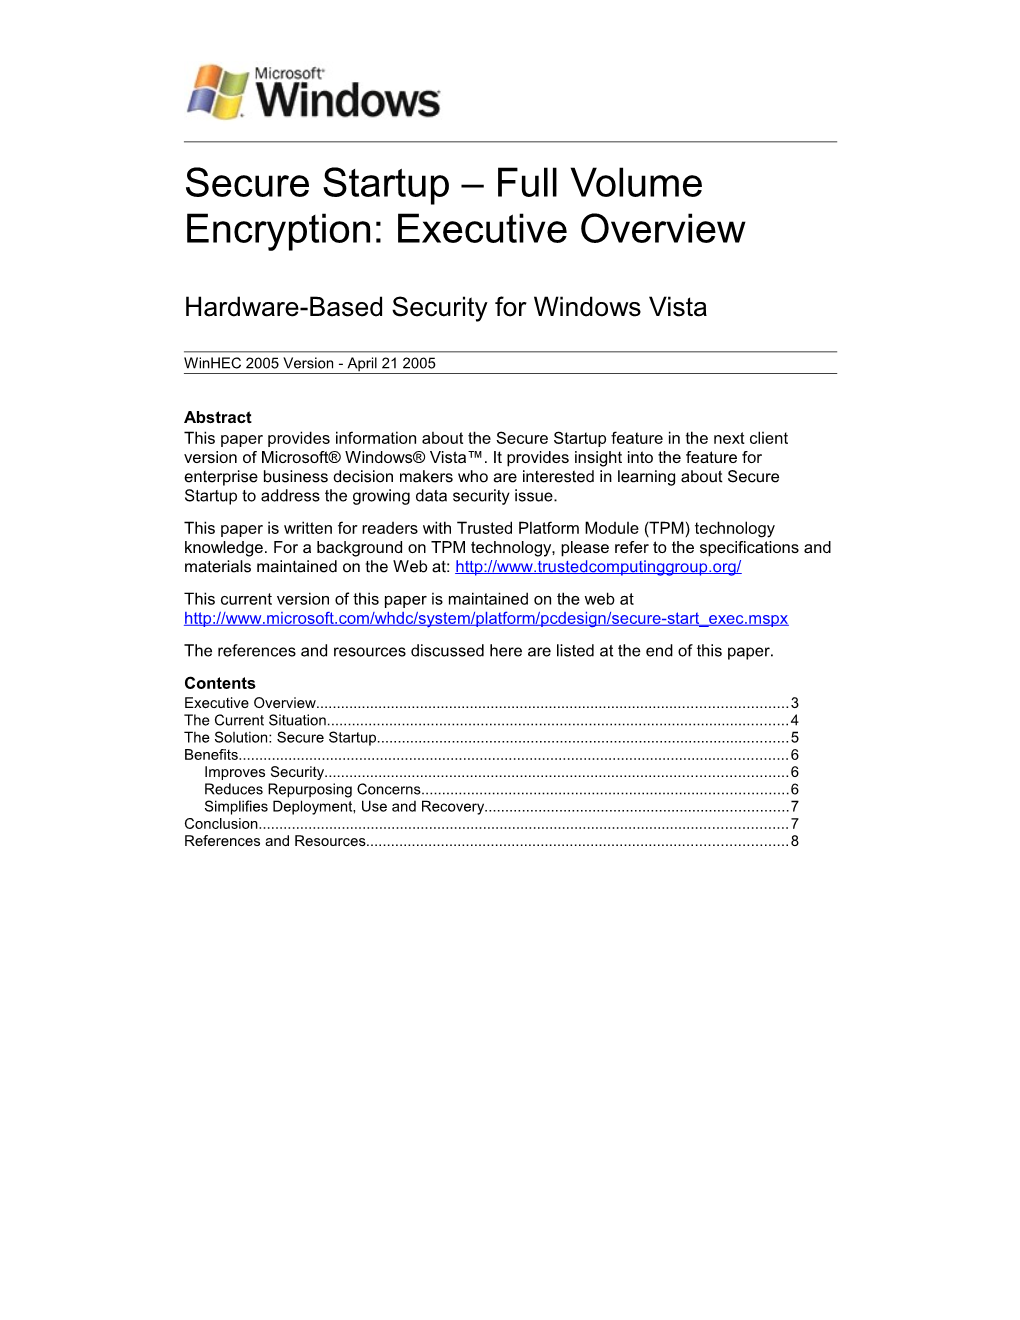 Secure Startup - Full Volume Encryption: Executive Overview